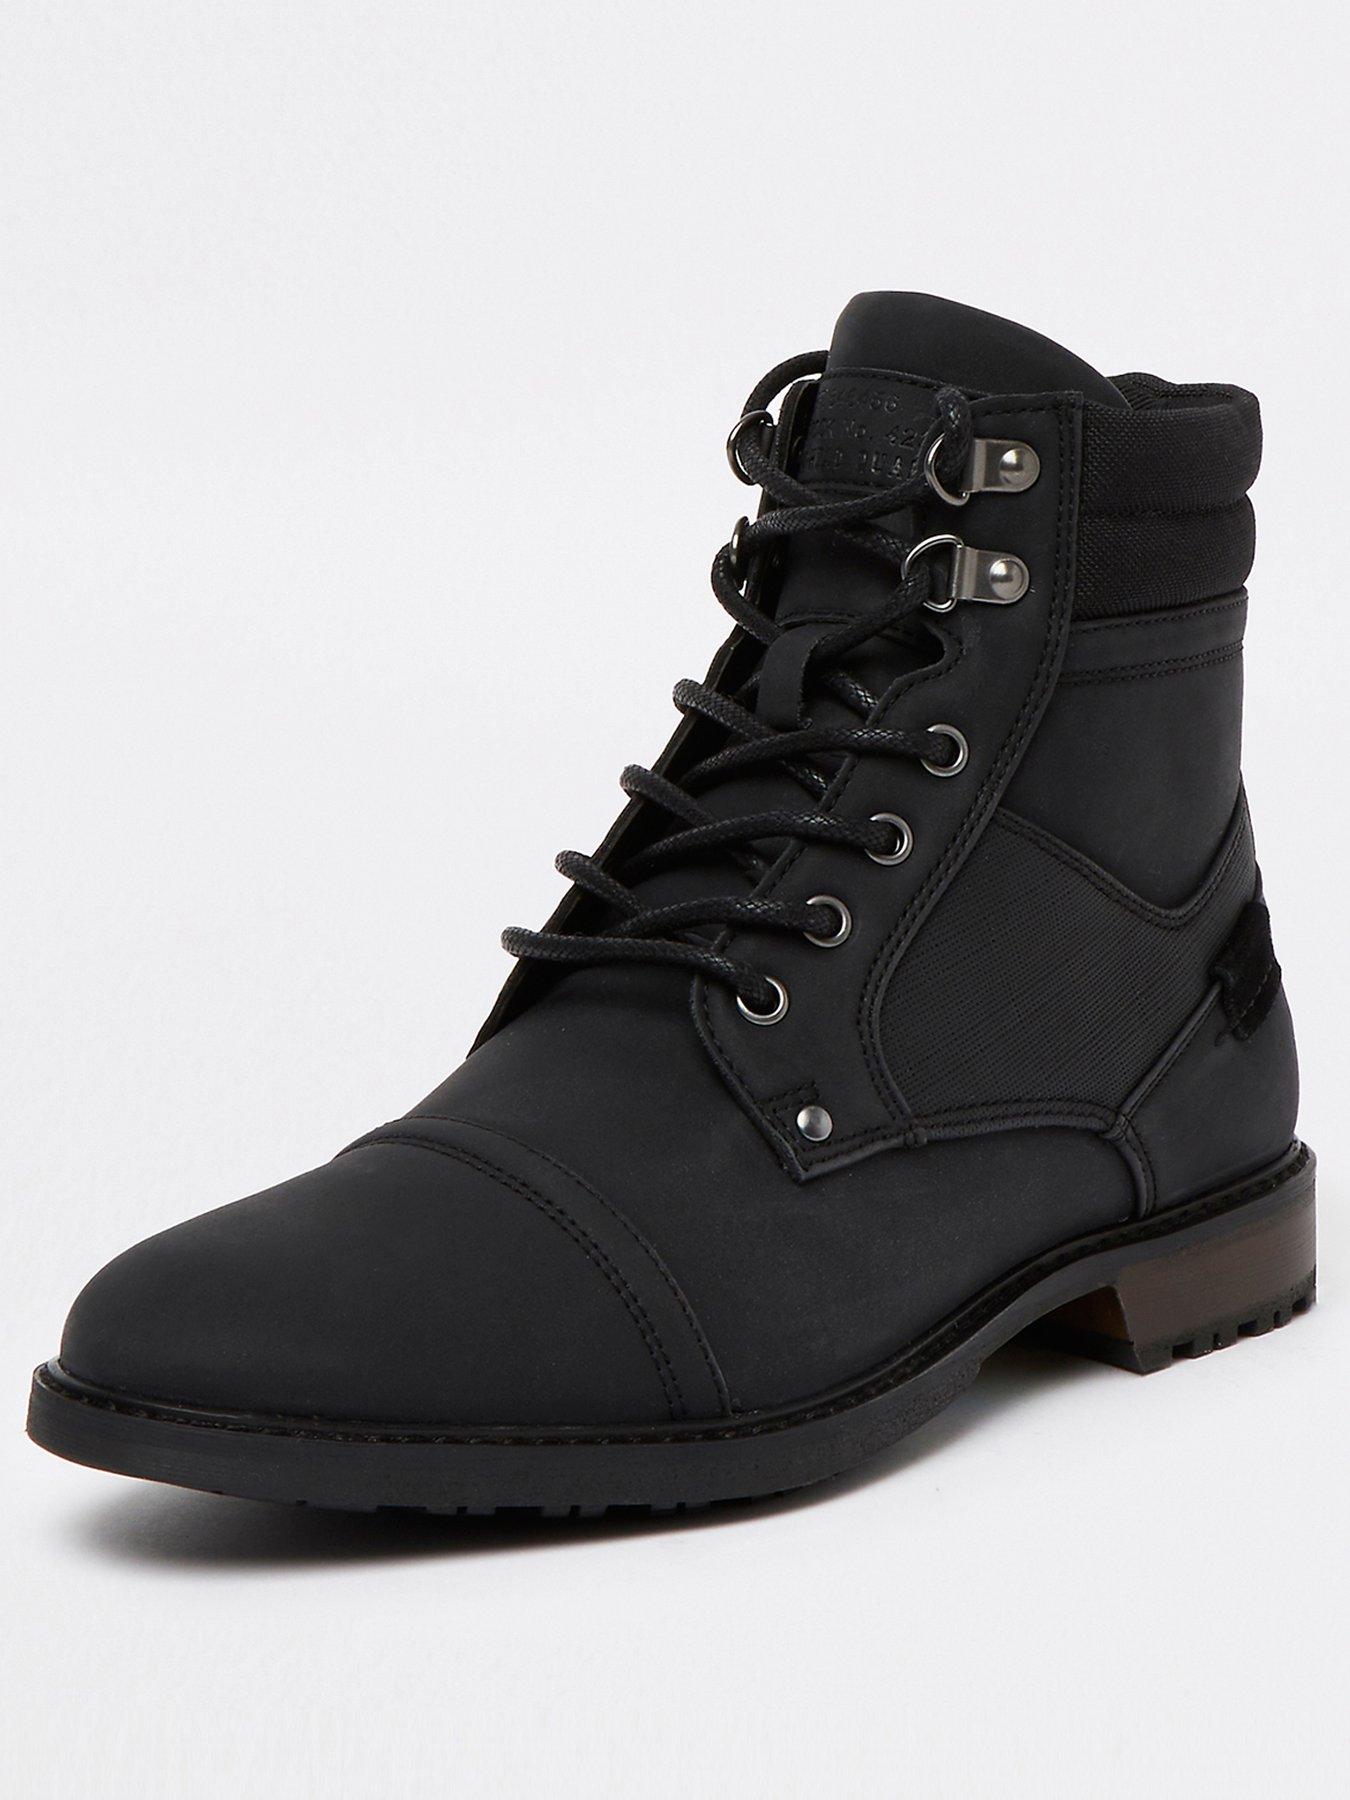 Shoes & boots Zip Lace Up Military Boots - Black